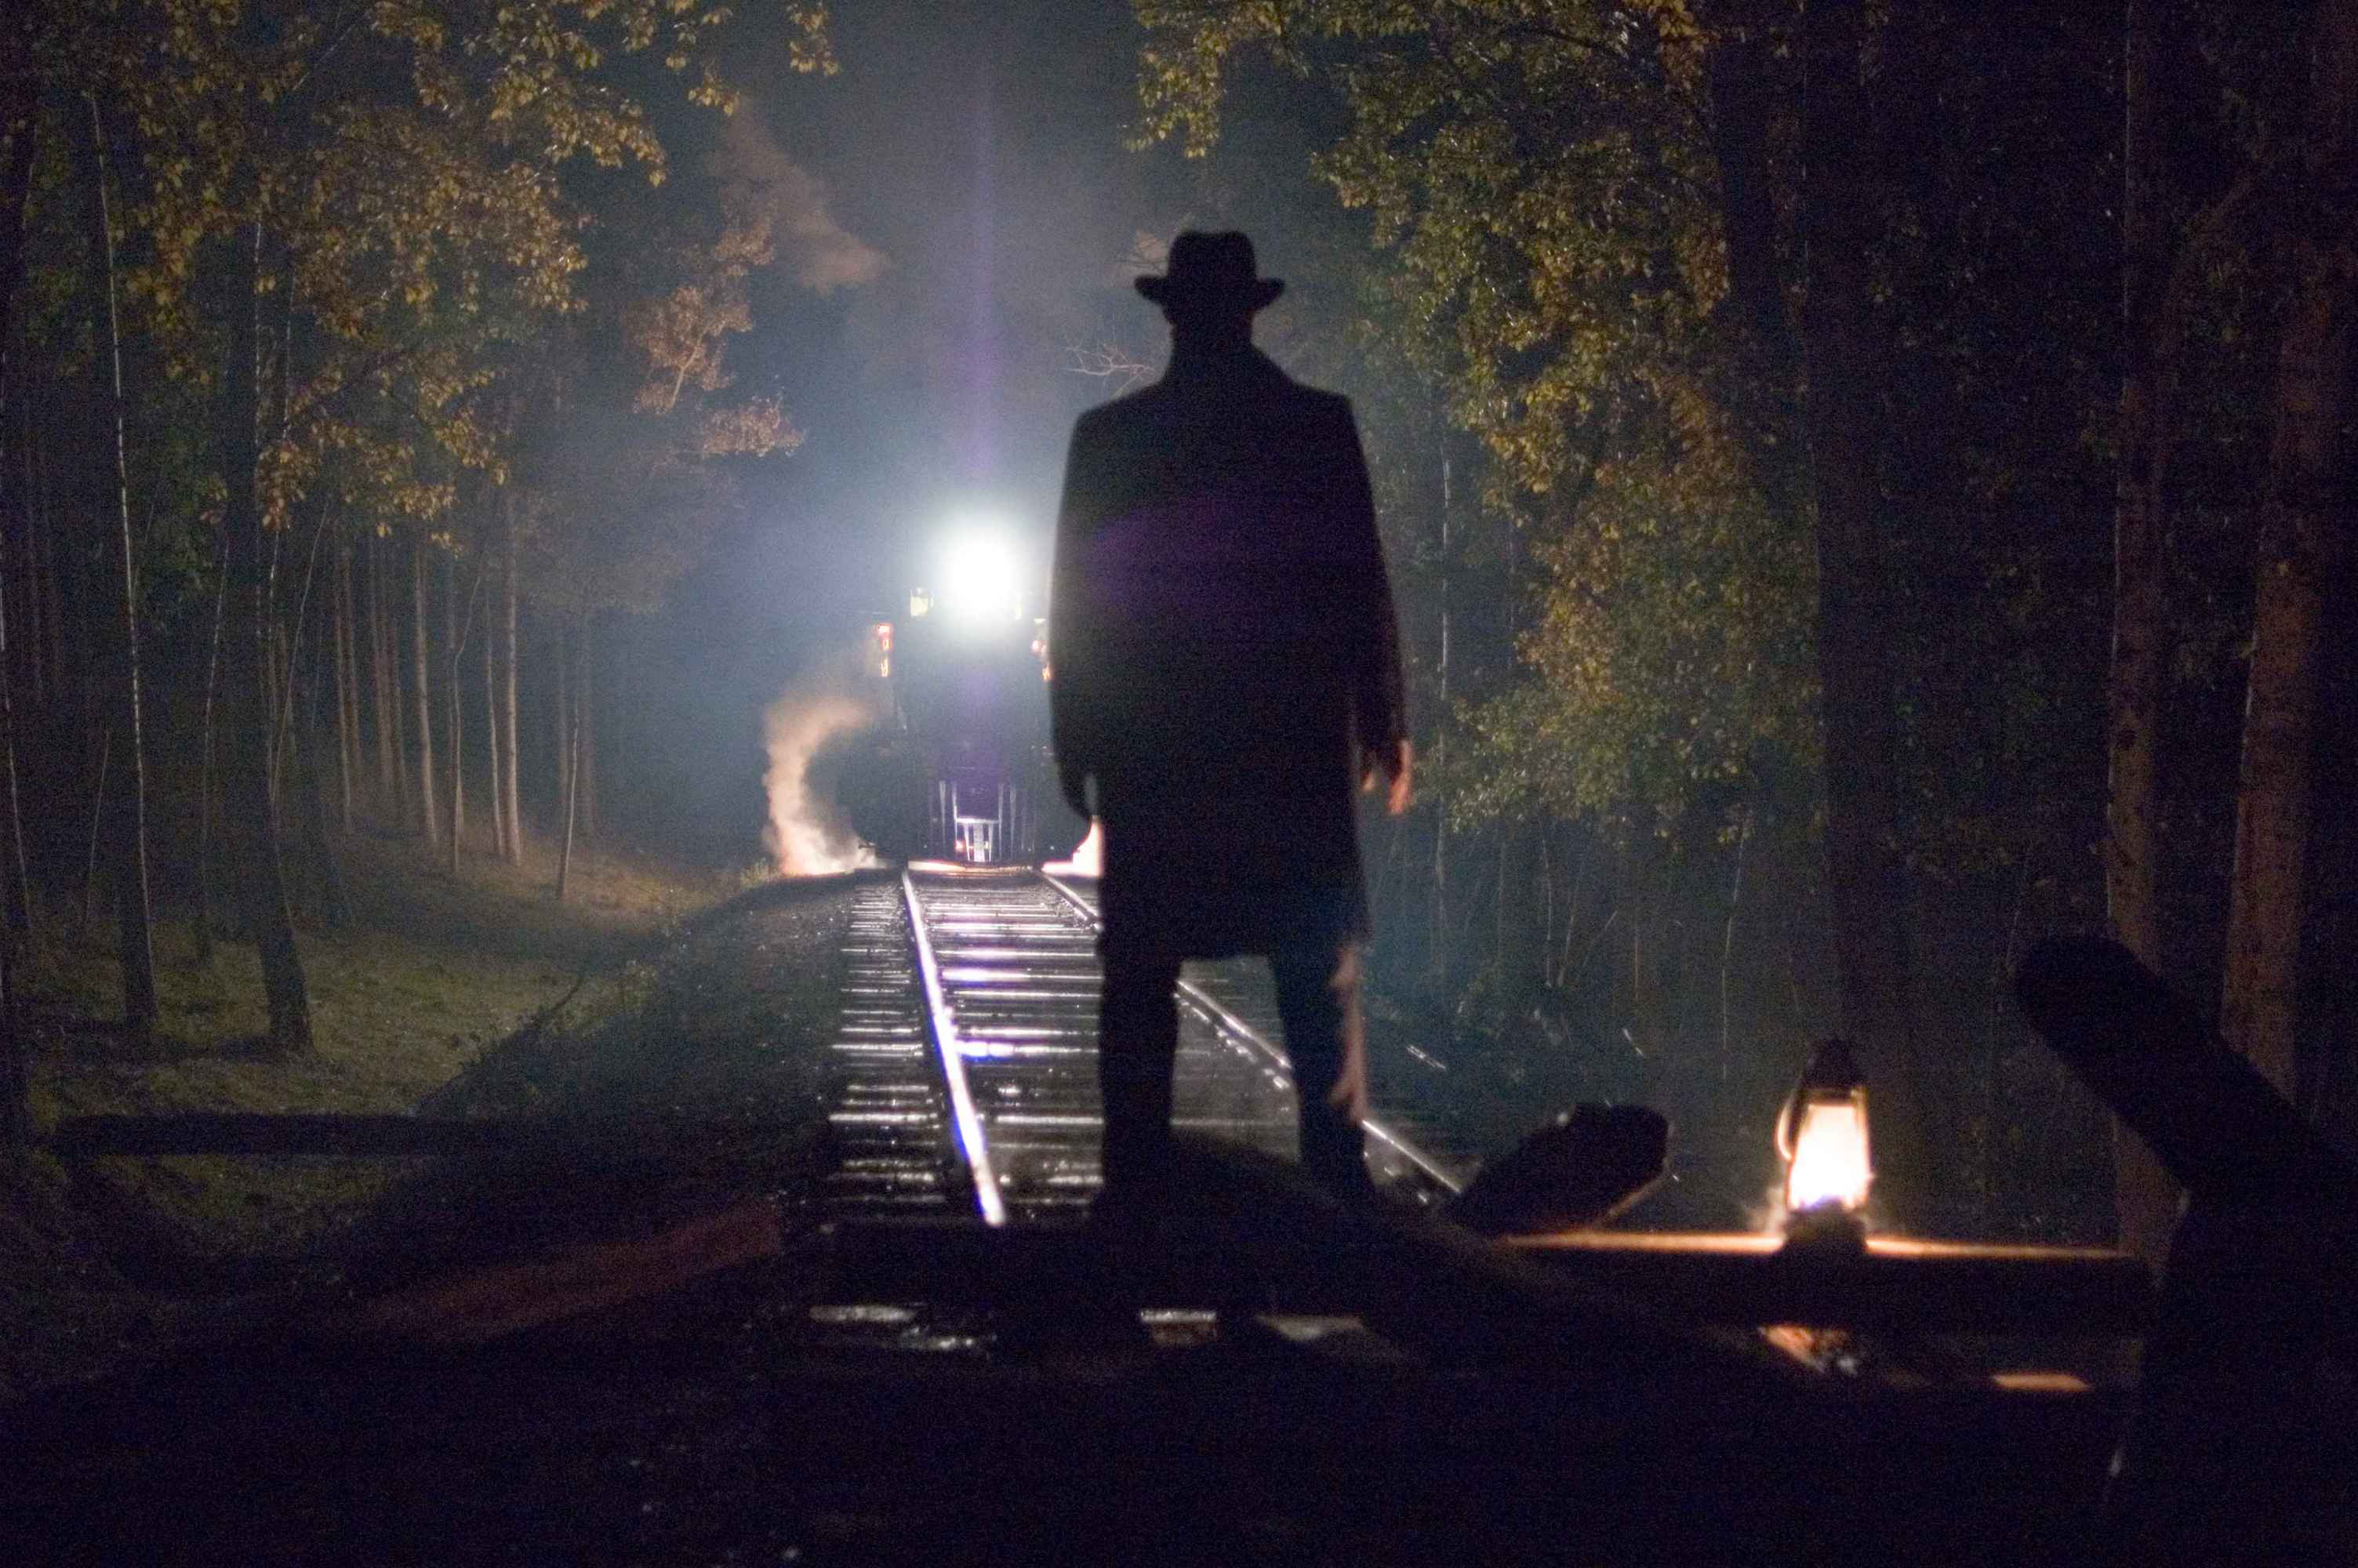 High Resolution Wallpaper | The Assassination Of Jesse James By The Coward Robert Ford 3007x2000 px